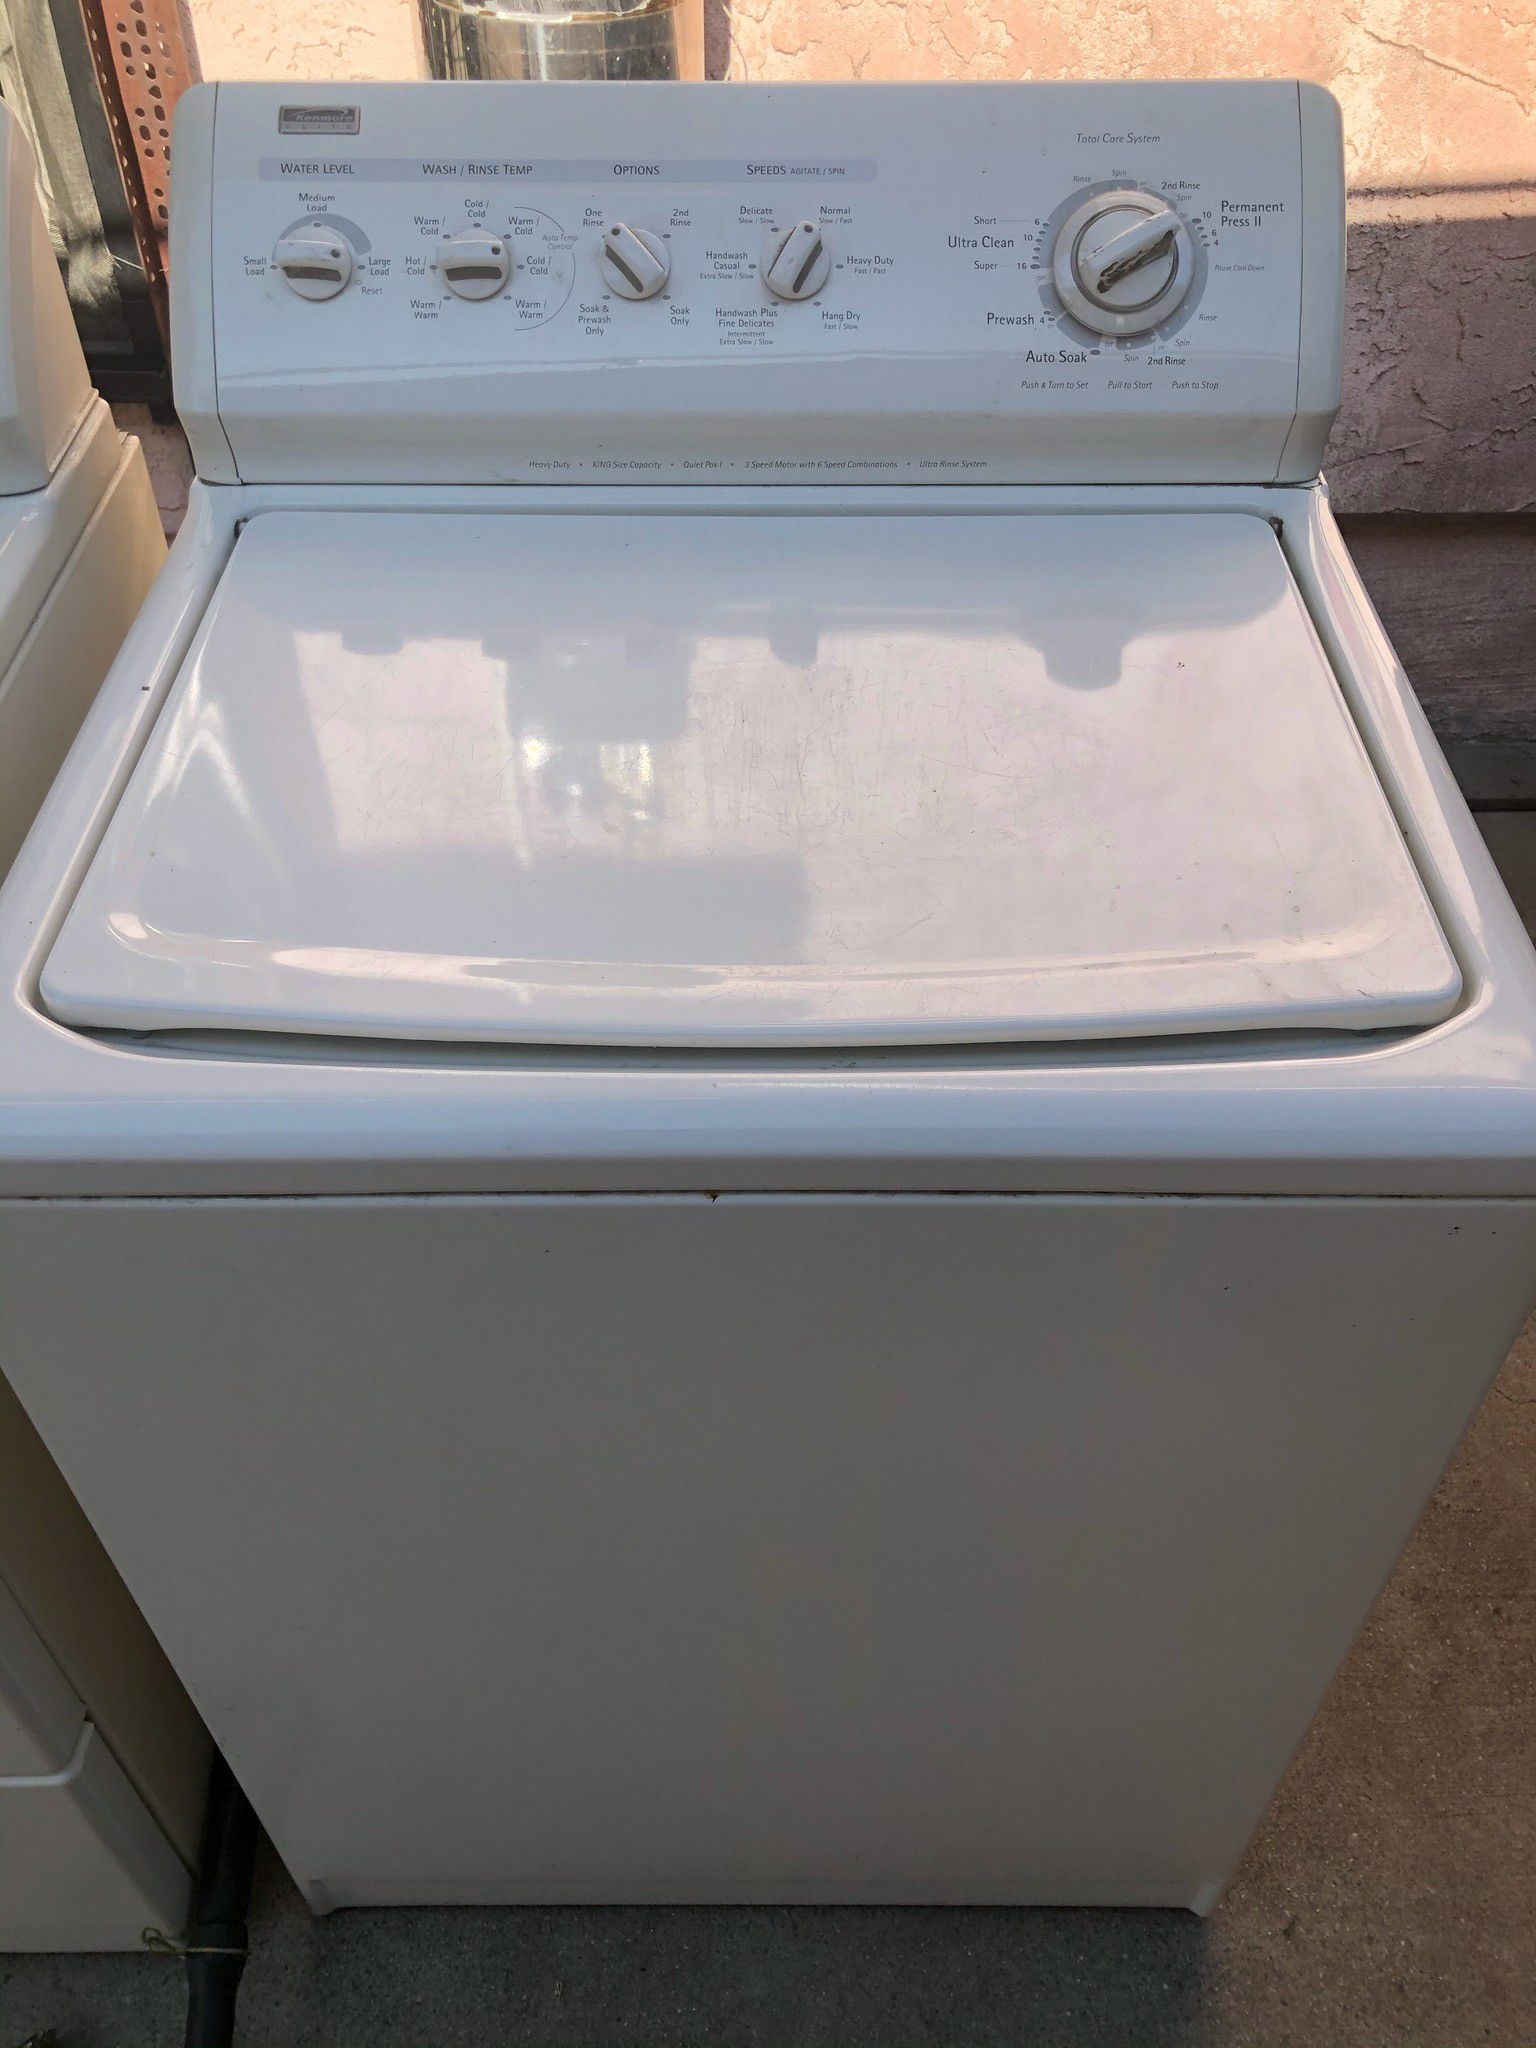 Washer dryer for cheap kenmore price negotiable hit me up